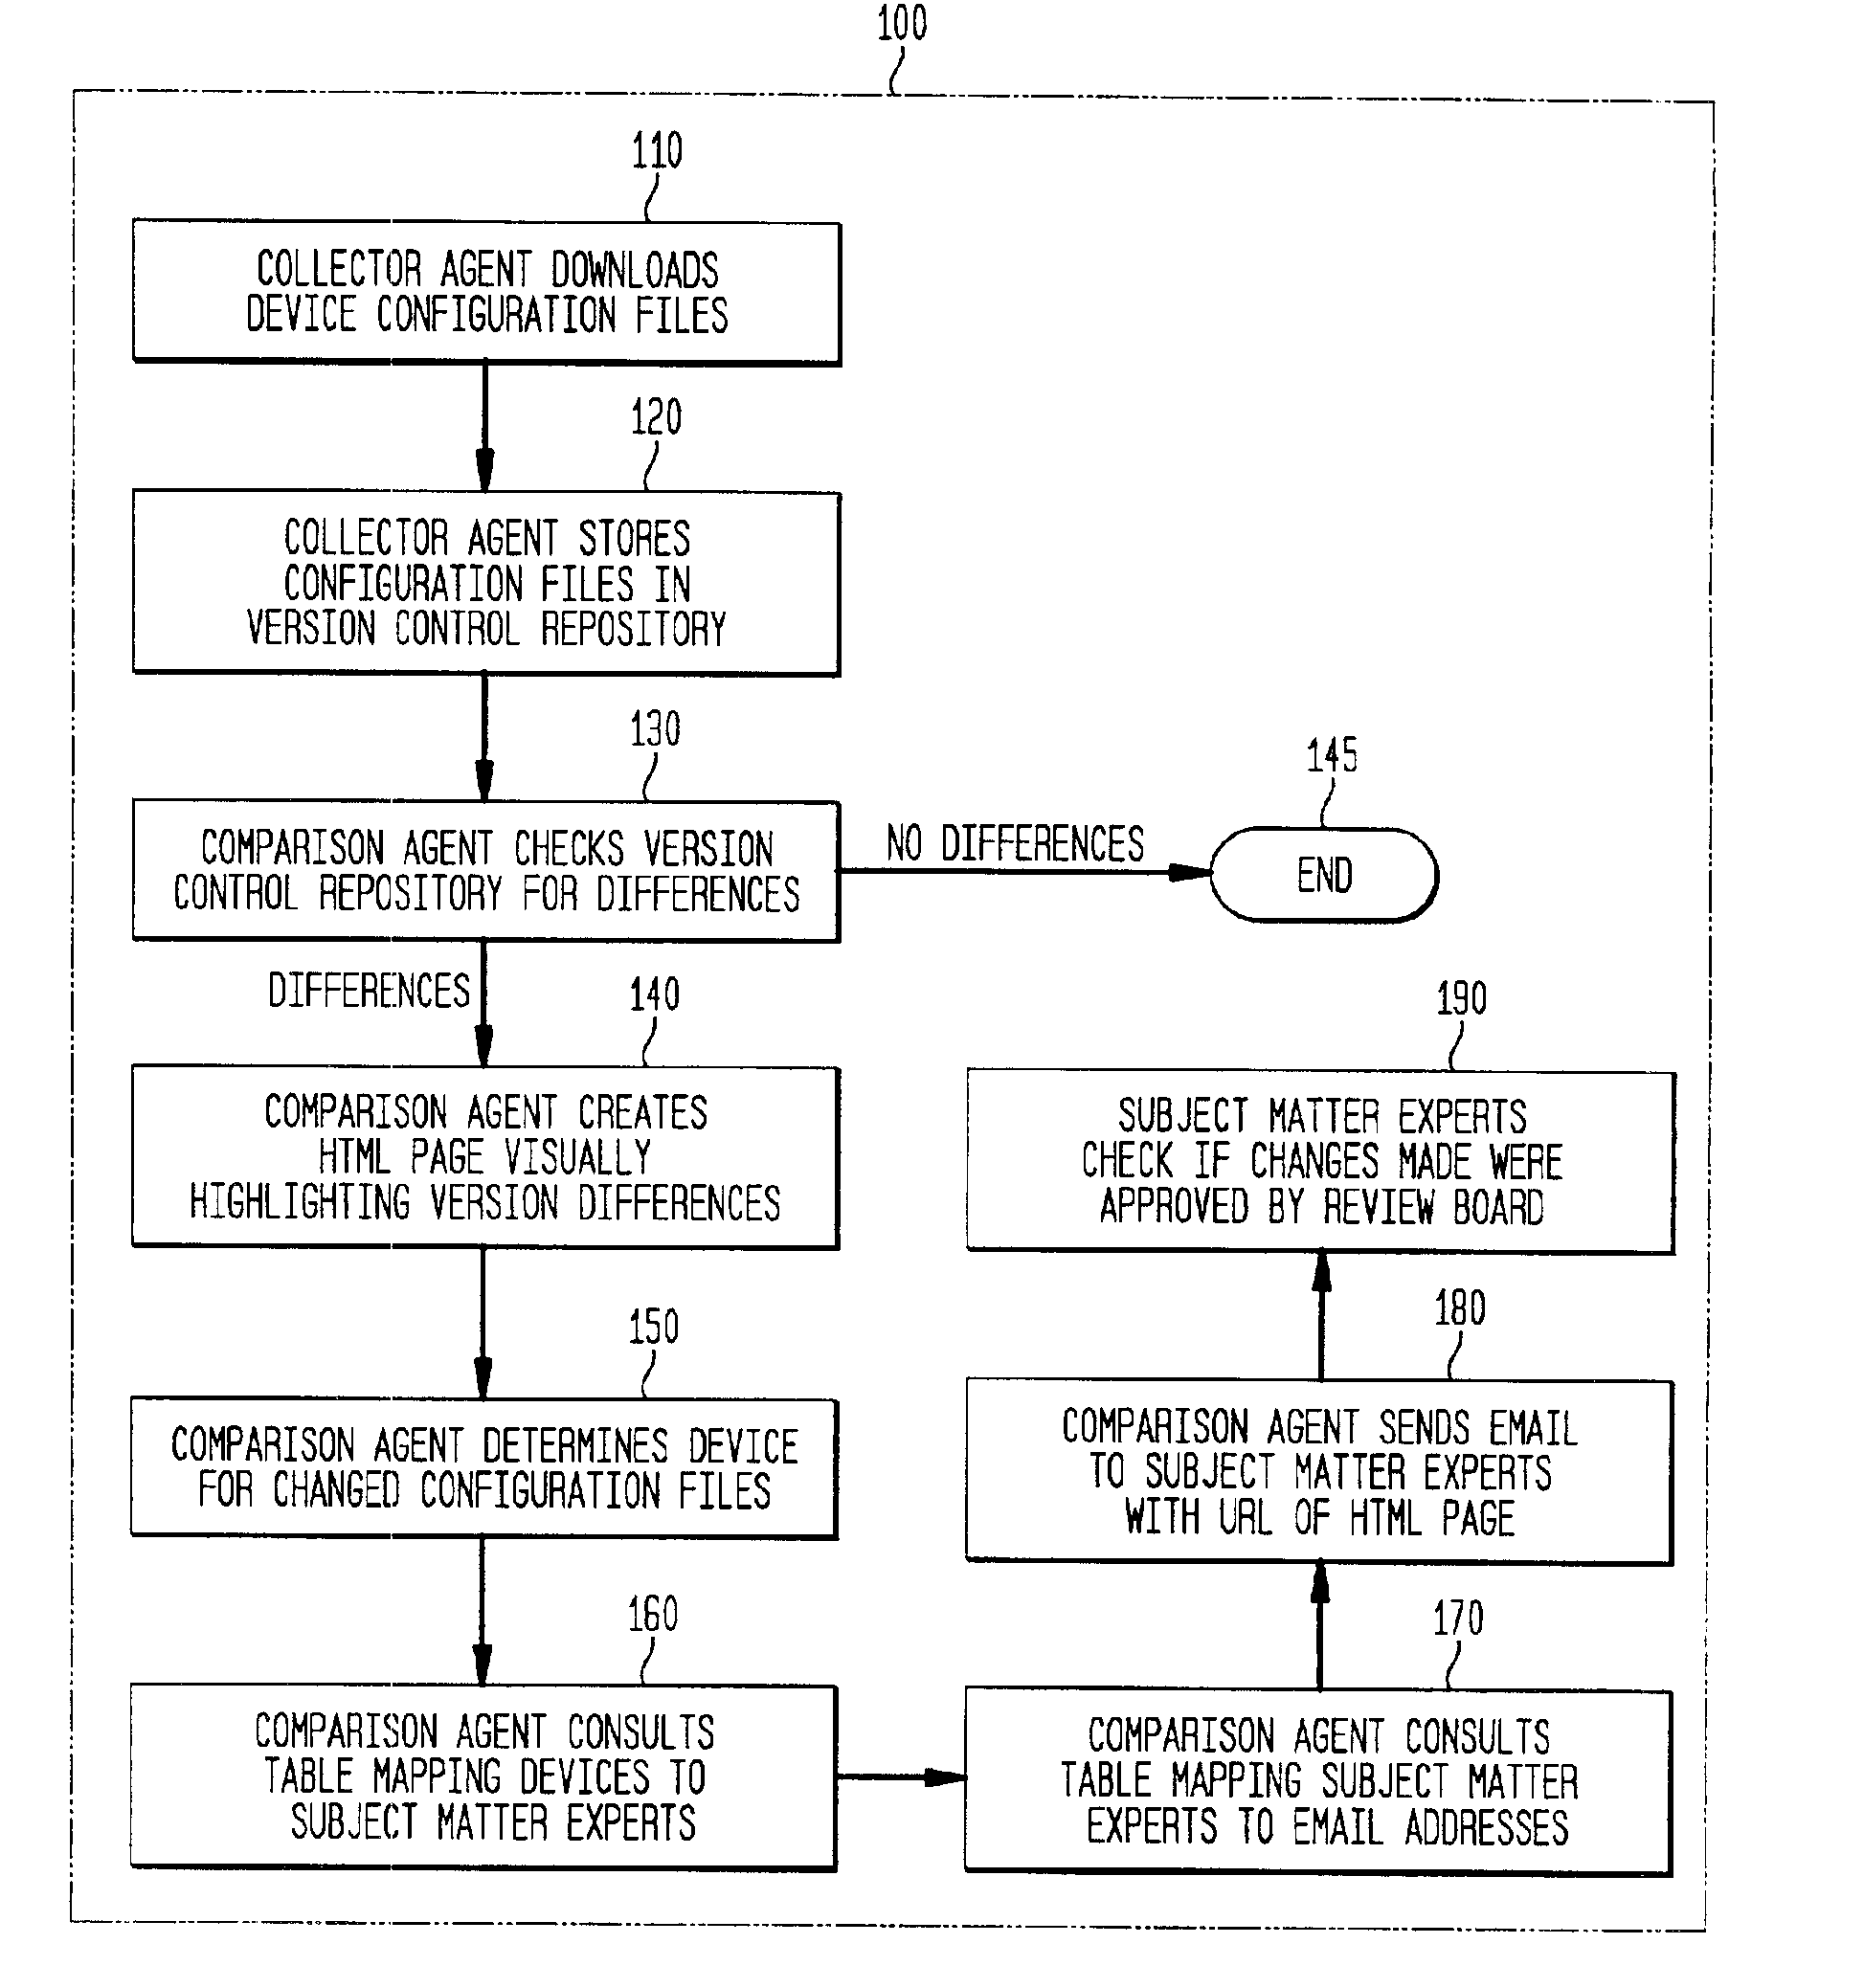 Method and apparatus for authorizing and reporting changes to device configurations